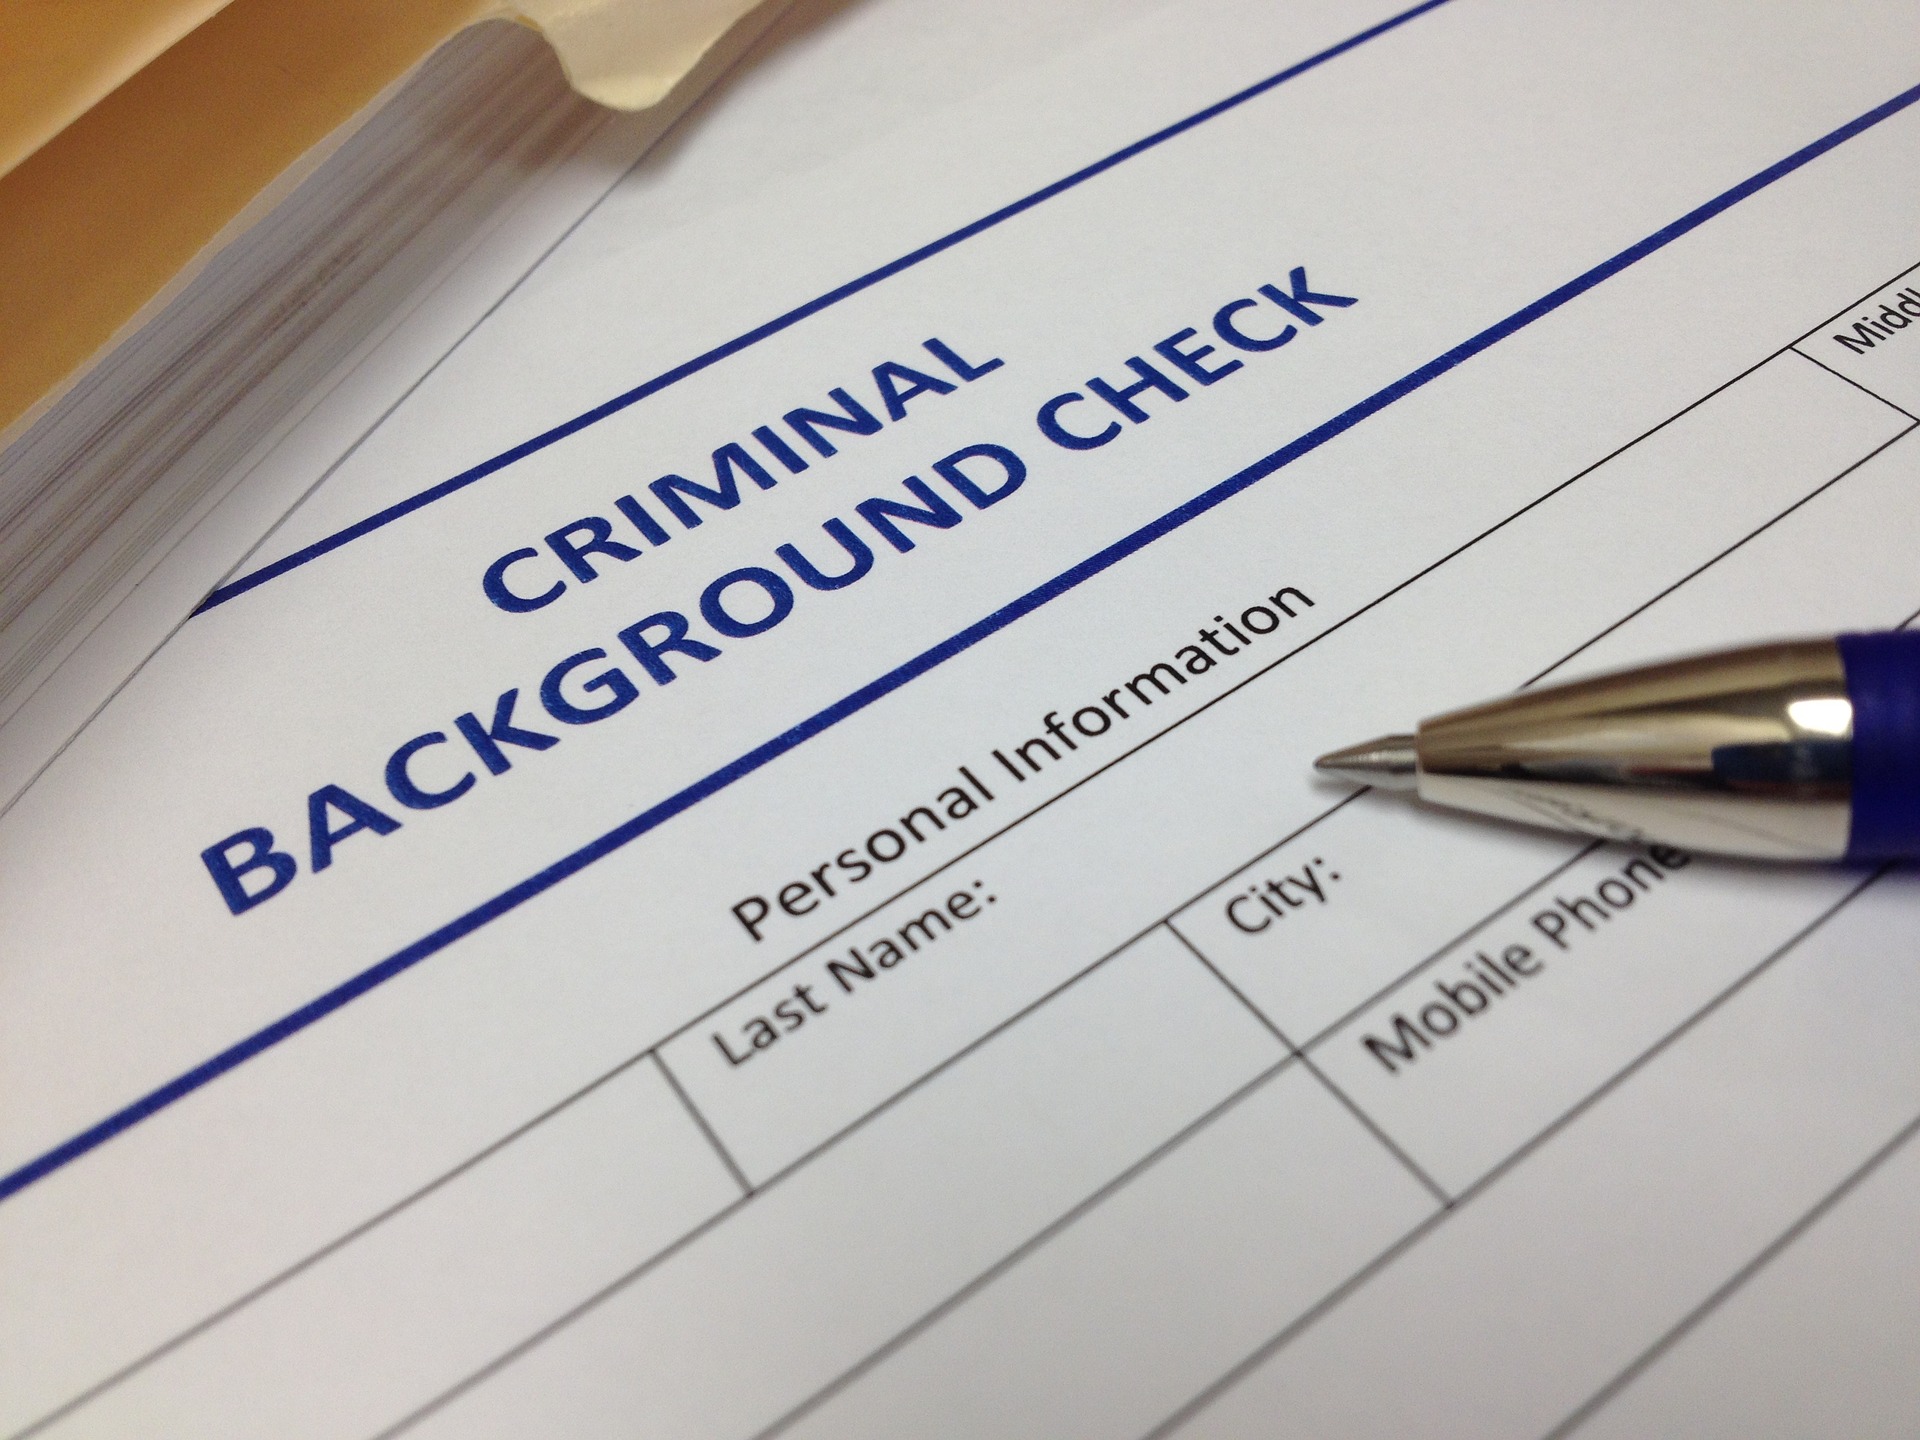 background check 1054067 1920